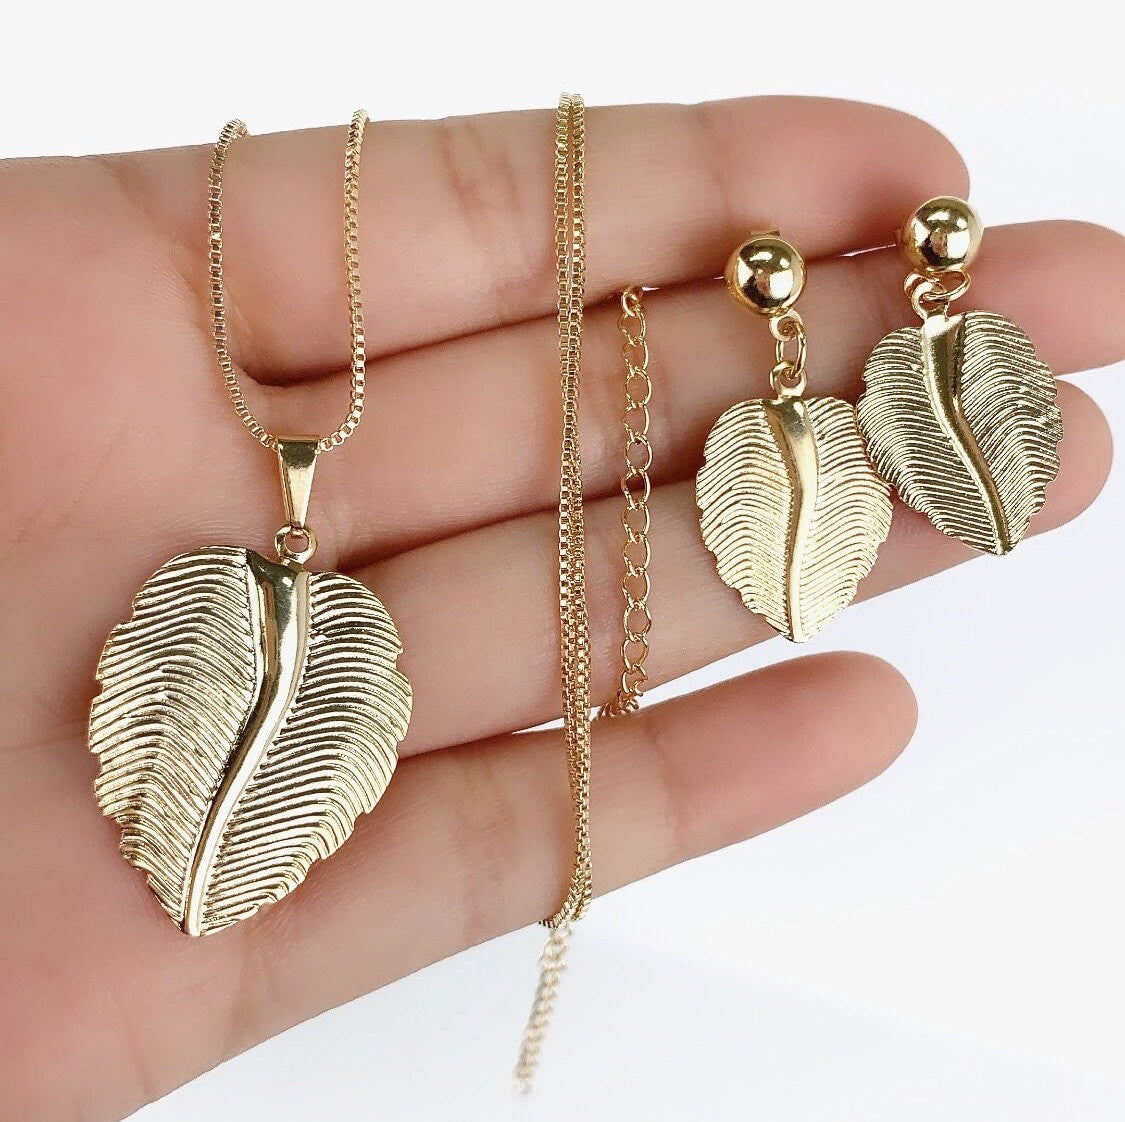 18k Gold Filled 1mm Box Chain with Texturized Leaf Shape Design